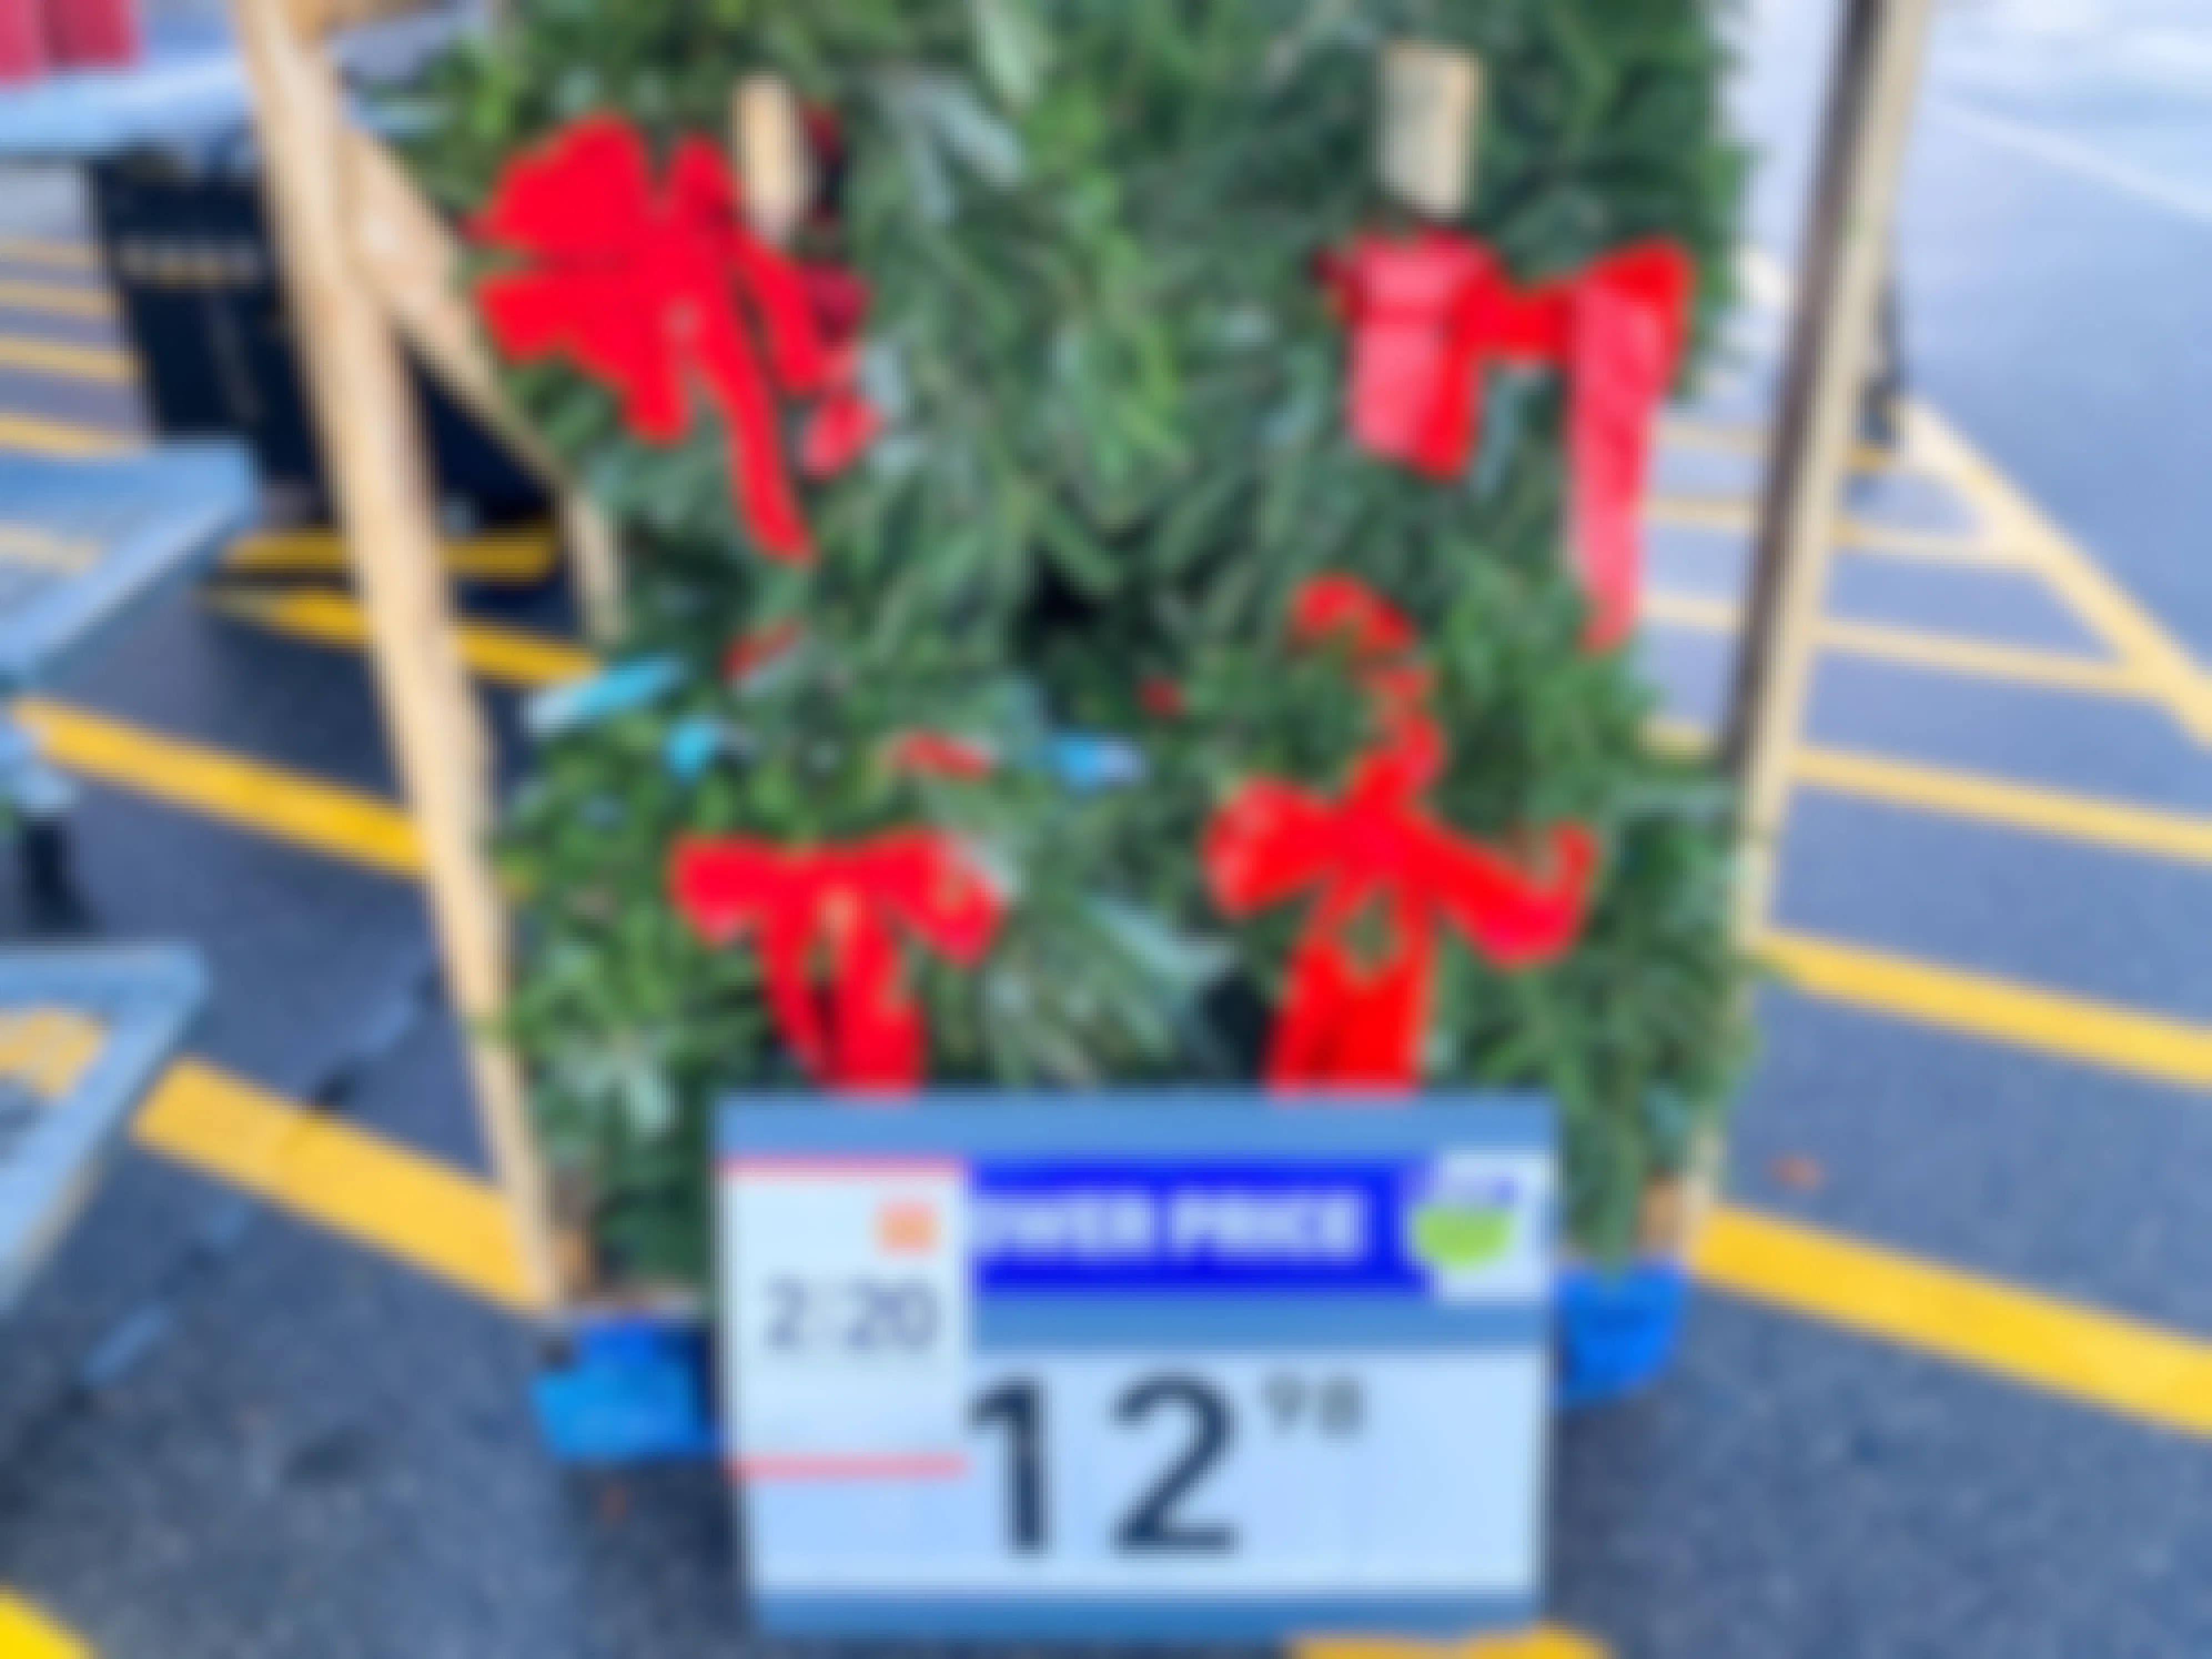 Holiday wreaths on display in front of Lowe's with a sale sign that says, "2 for $20